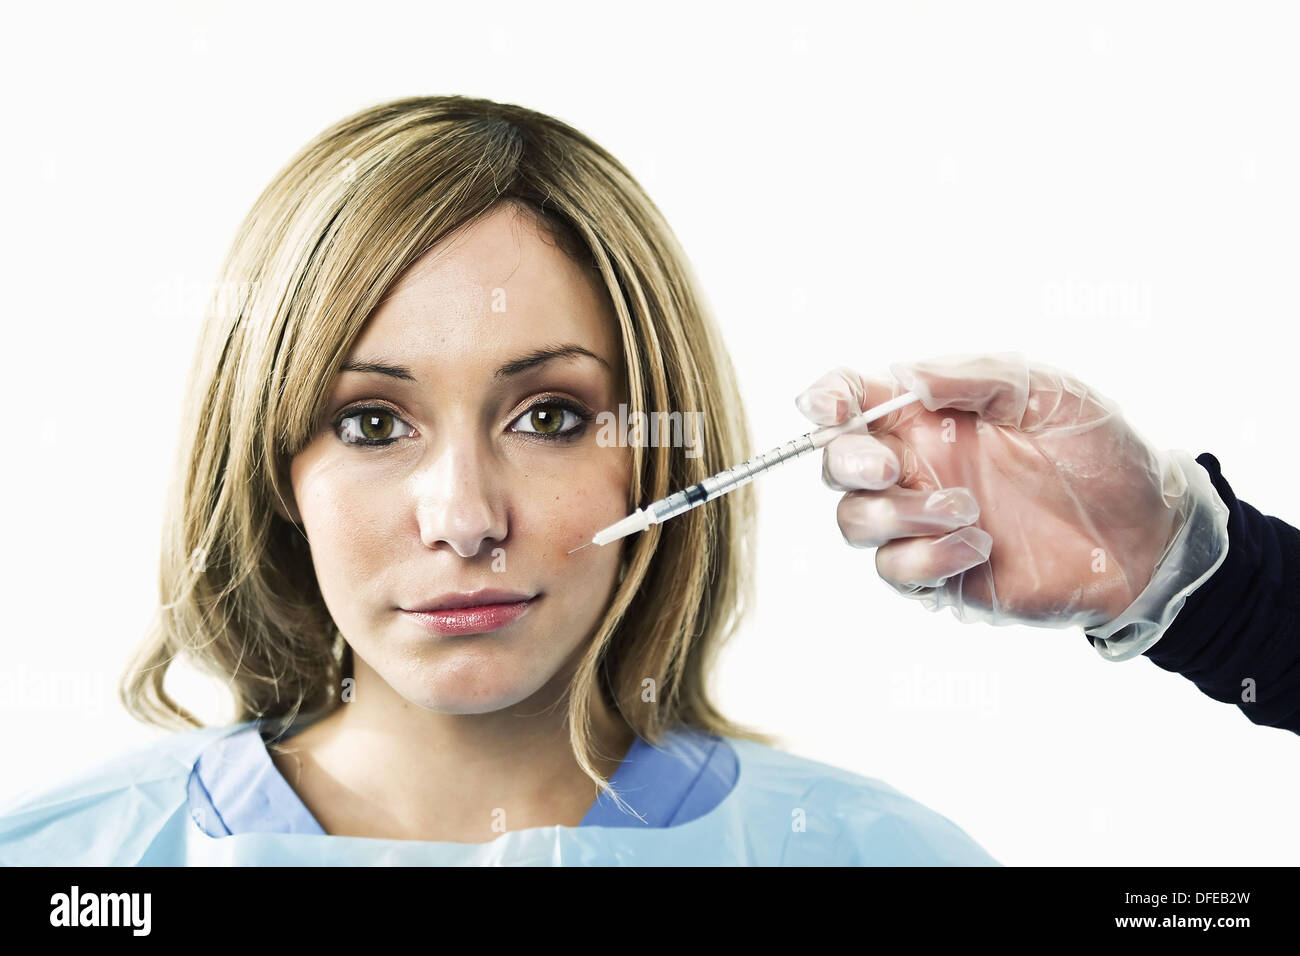 A young woman is injected with a syringe containing botox Stock Photo